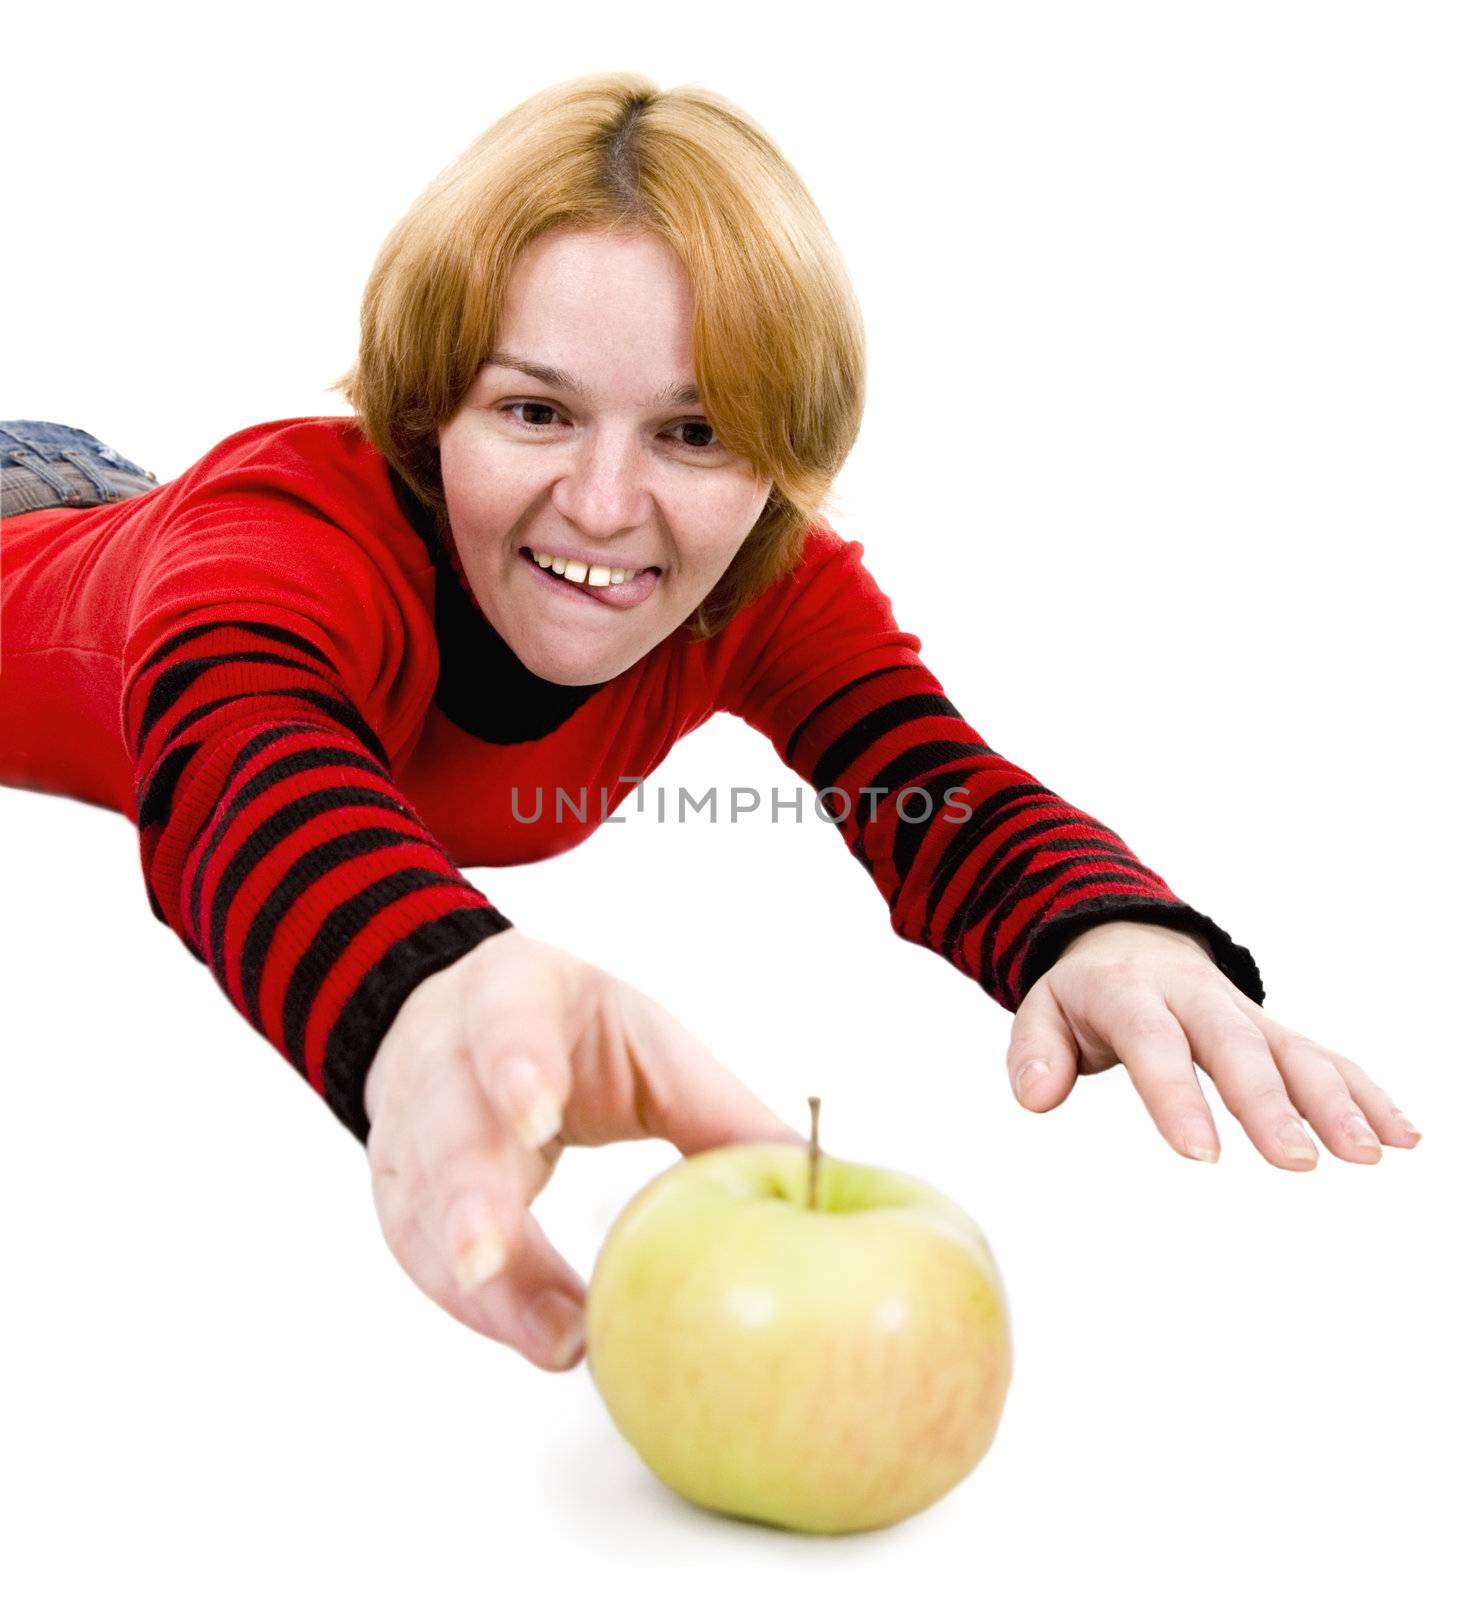 The woman giving a hand to a green apple